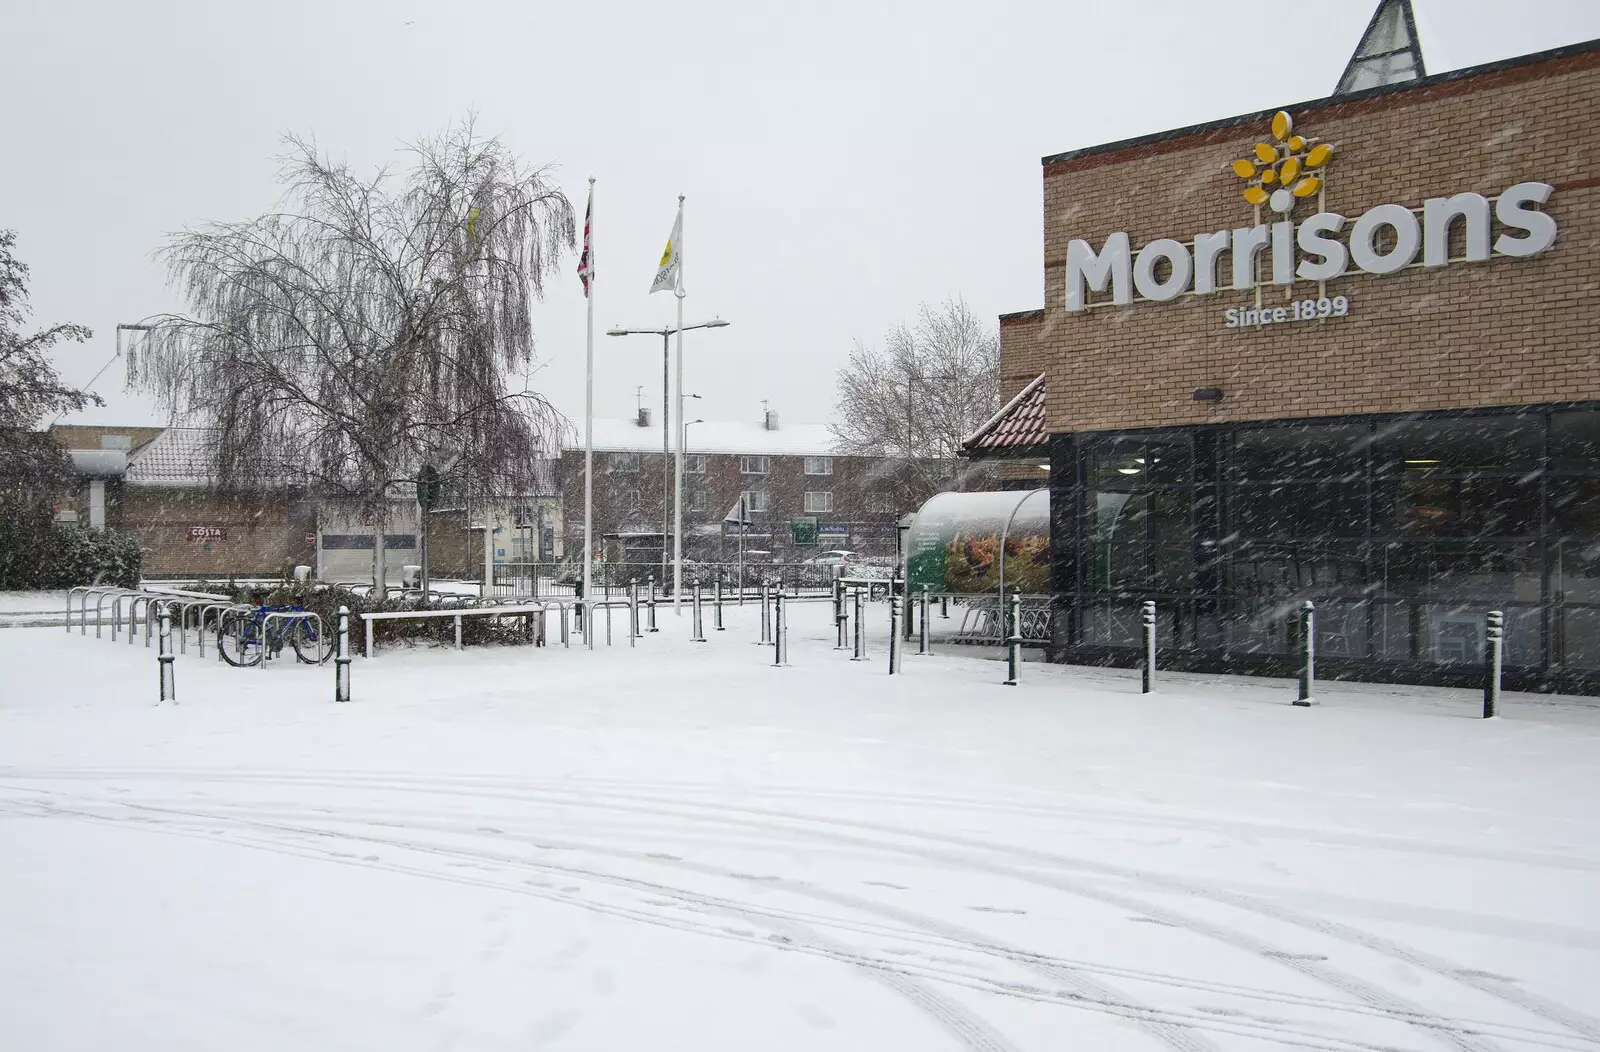 The view to Diss at Morrisons, from A Snowy Morning, Diss, Norfolk - 16th January 2021